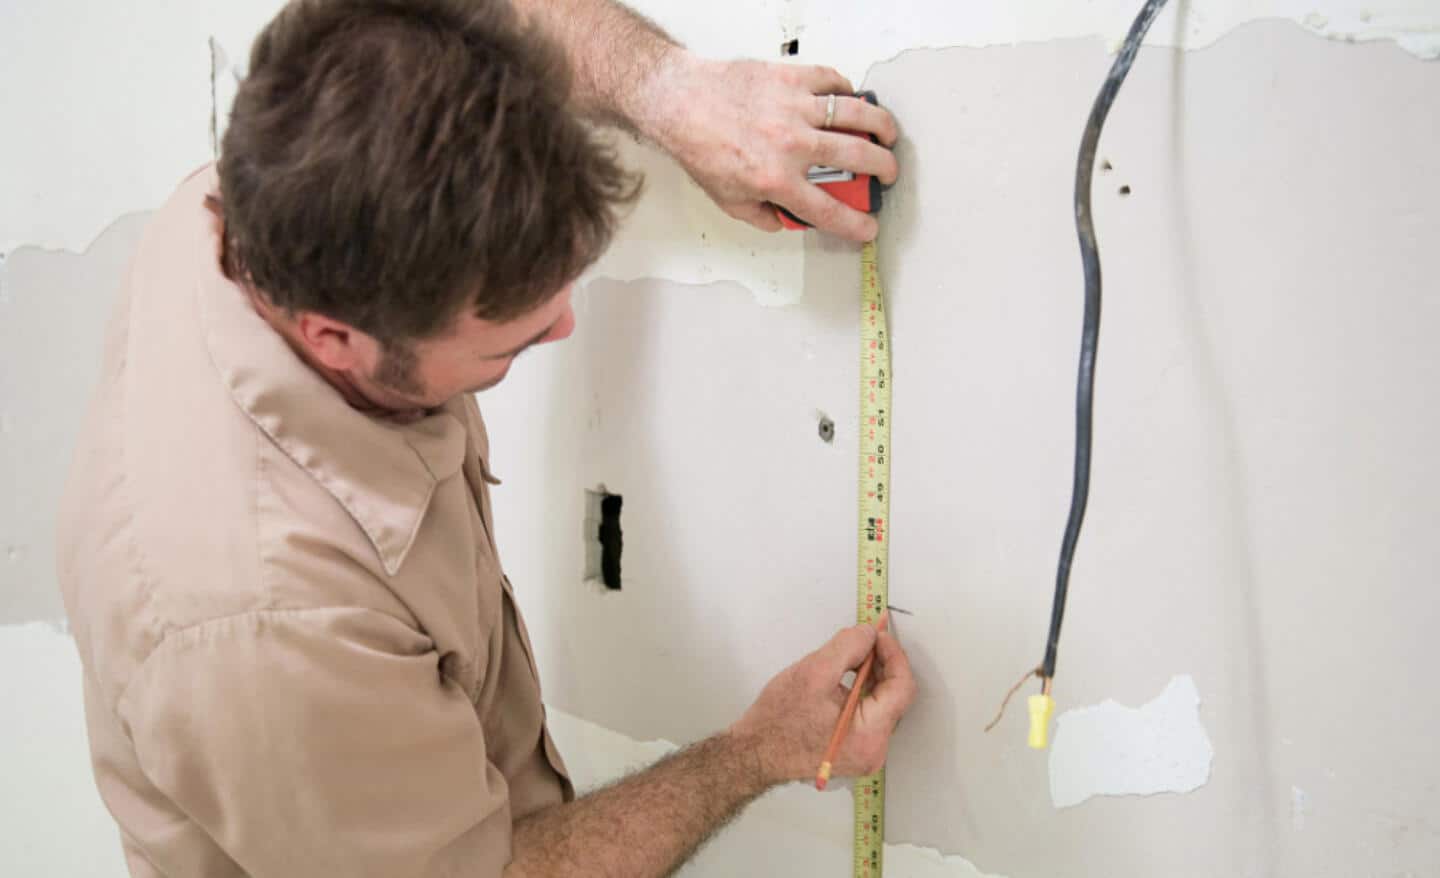 Contractor Measures for Hidden Electrical Outlet Installation